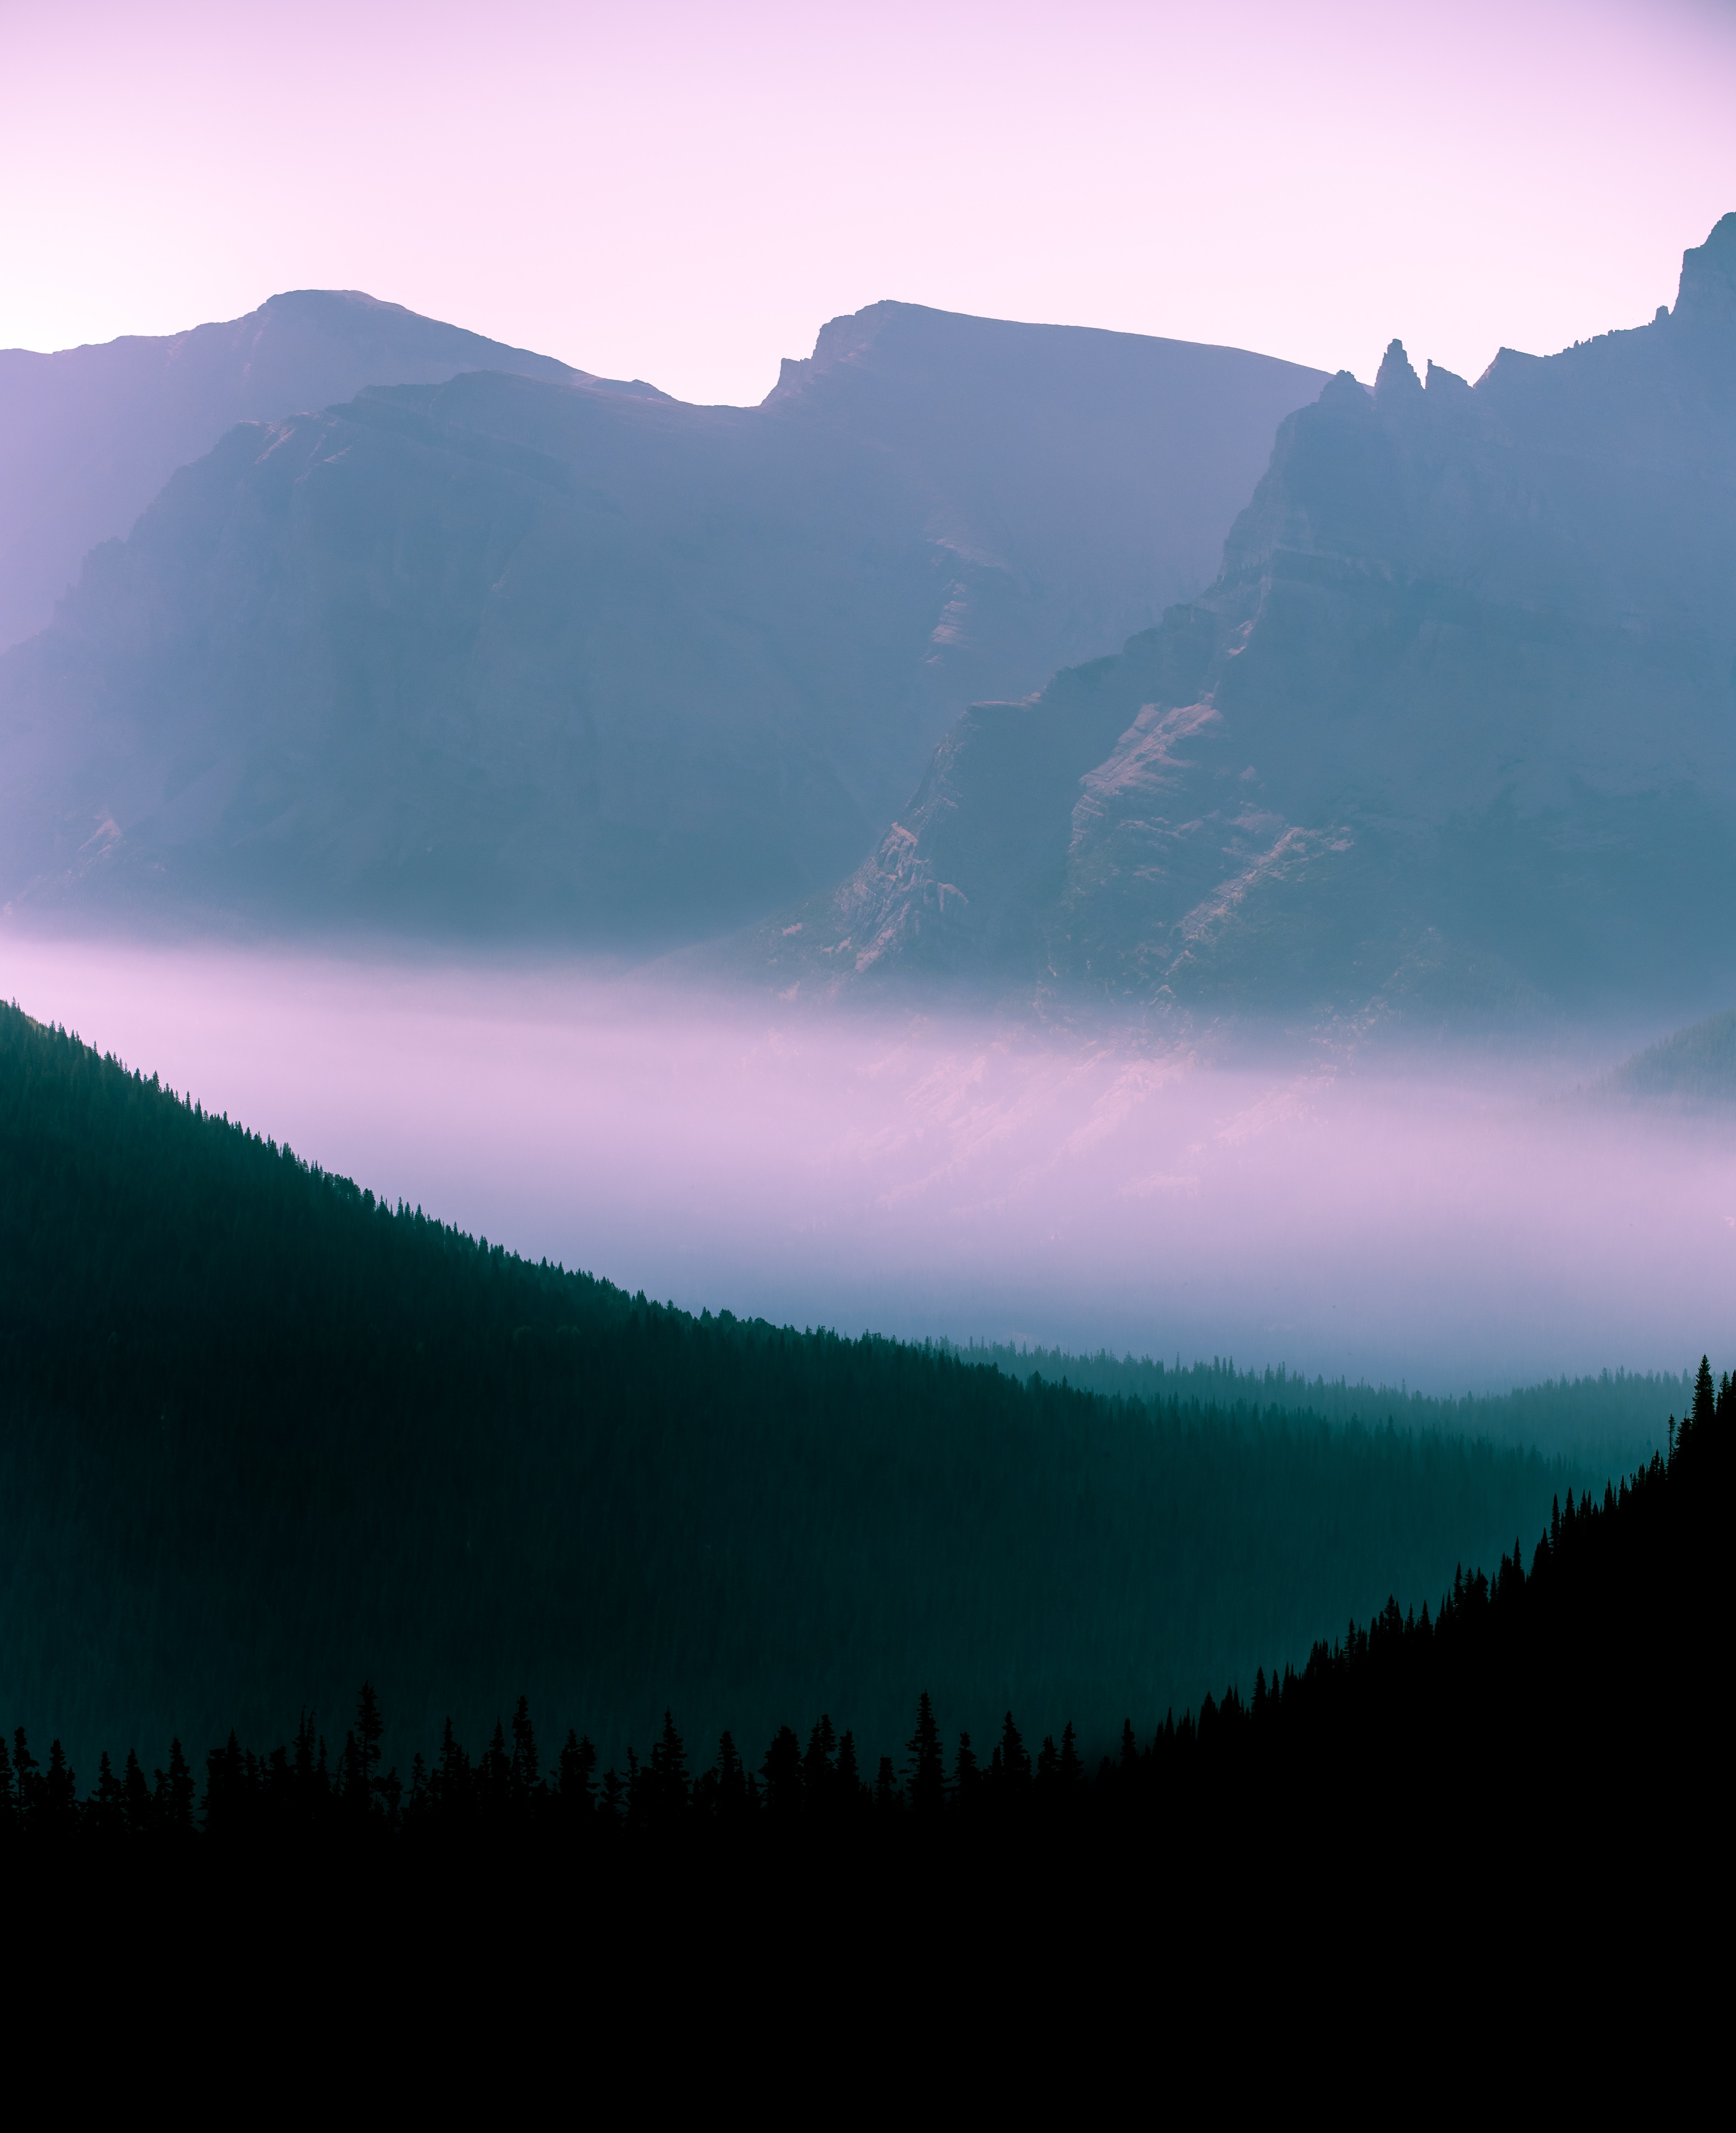 wallpapers outlines, trees, nature, sky, mountains, forest, fog